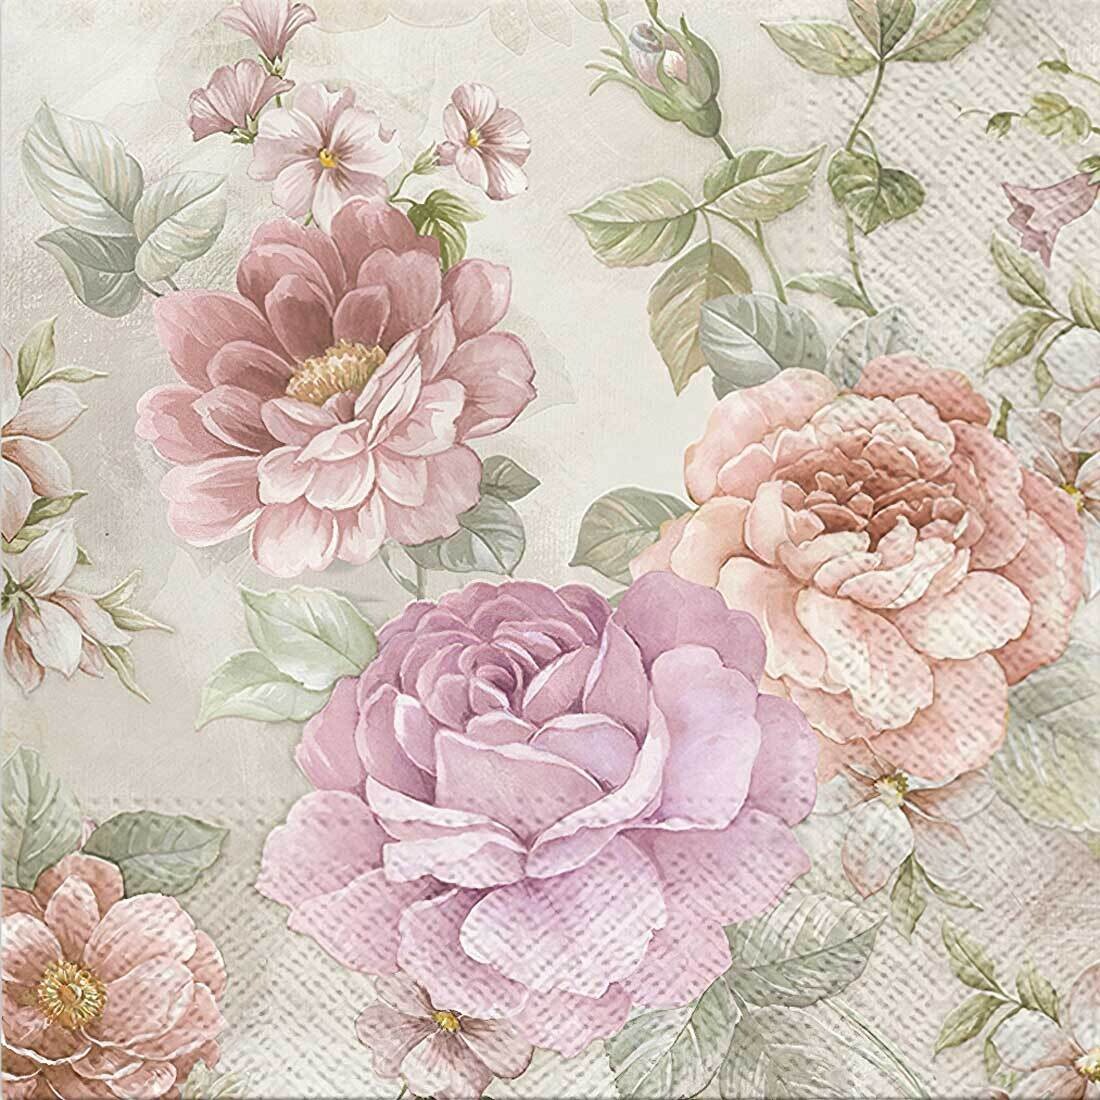 Decoupage Paper Napkins - Floral - Memory of Summer (1 Sheet)